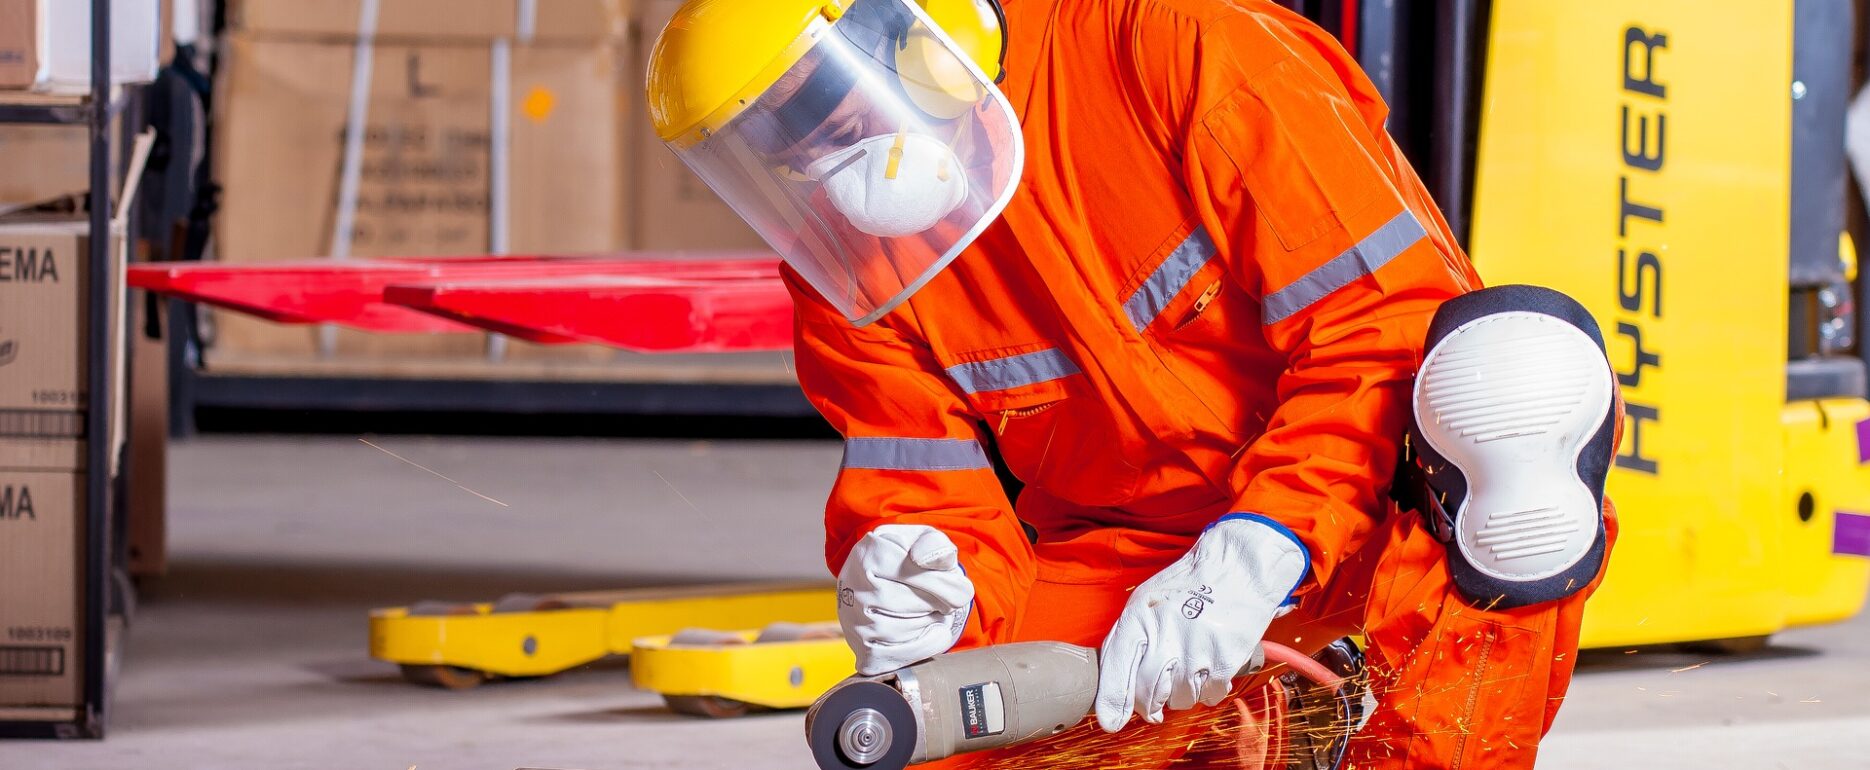 Hearing Protection in the Workplace